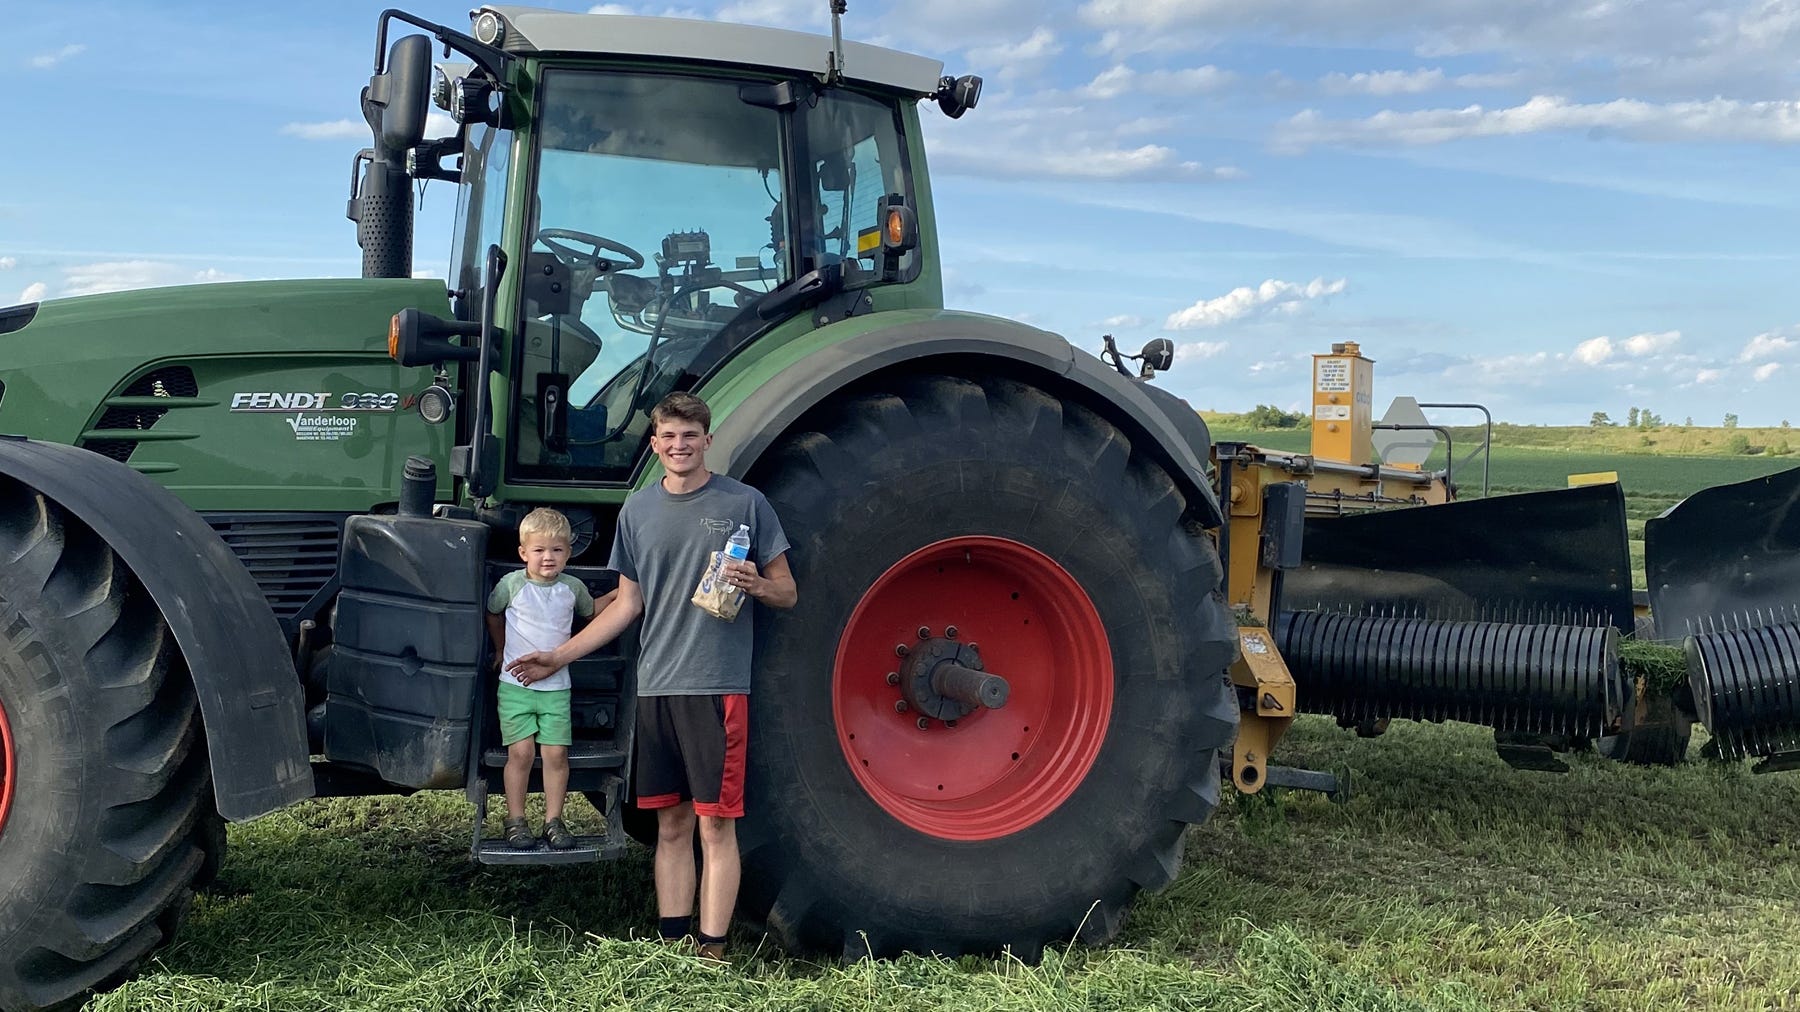  Leo and Gavin Maier on the farm near Waunakee standing next to a tractor